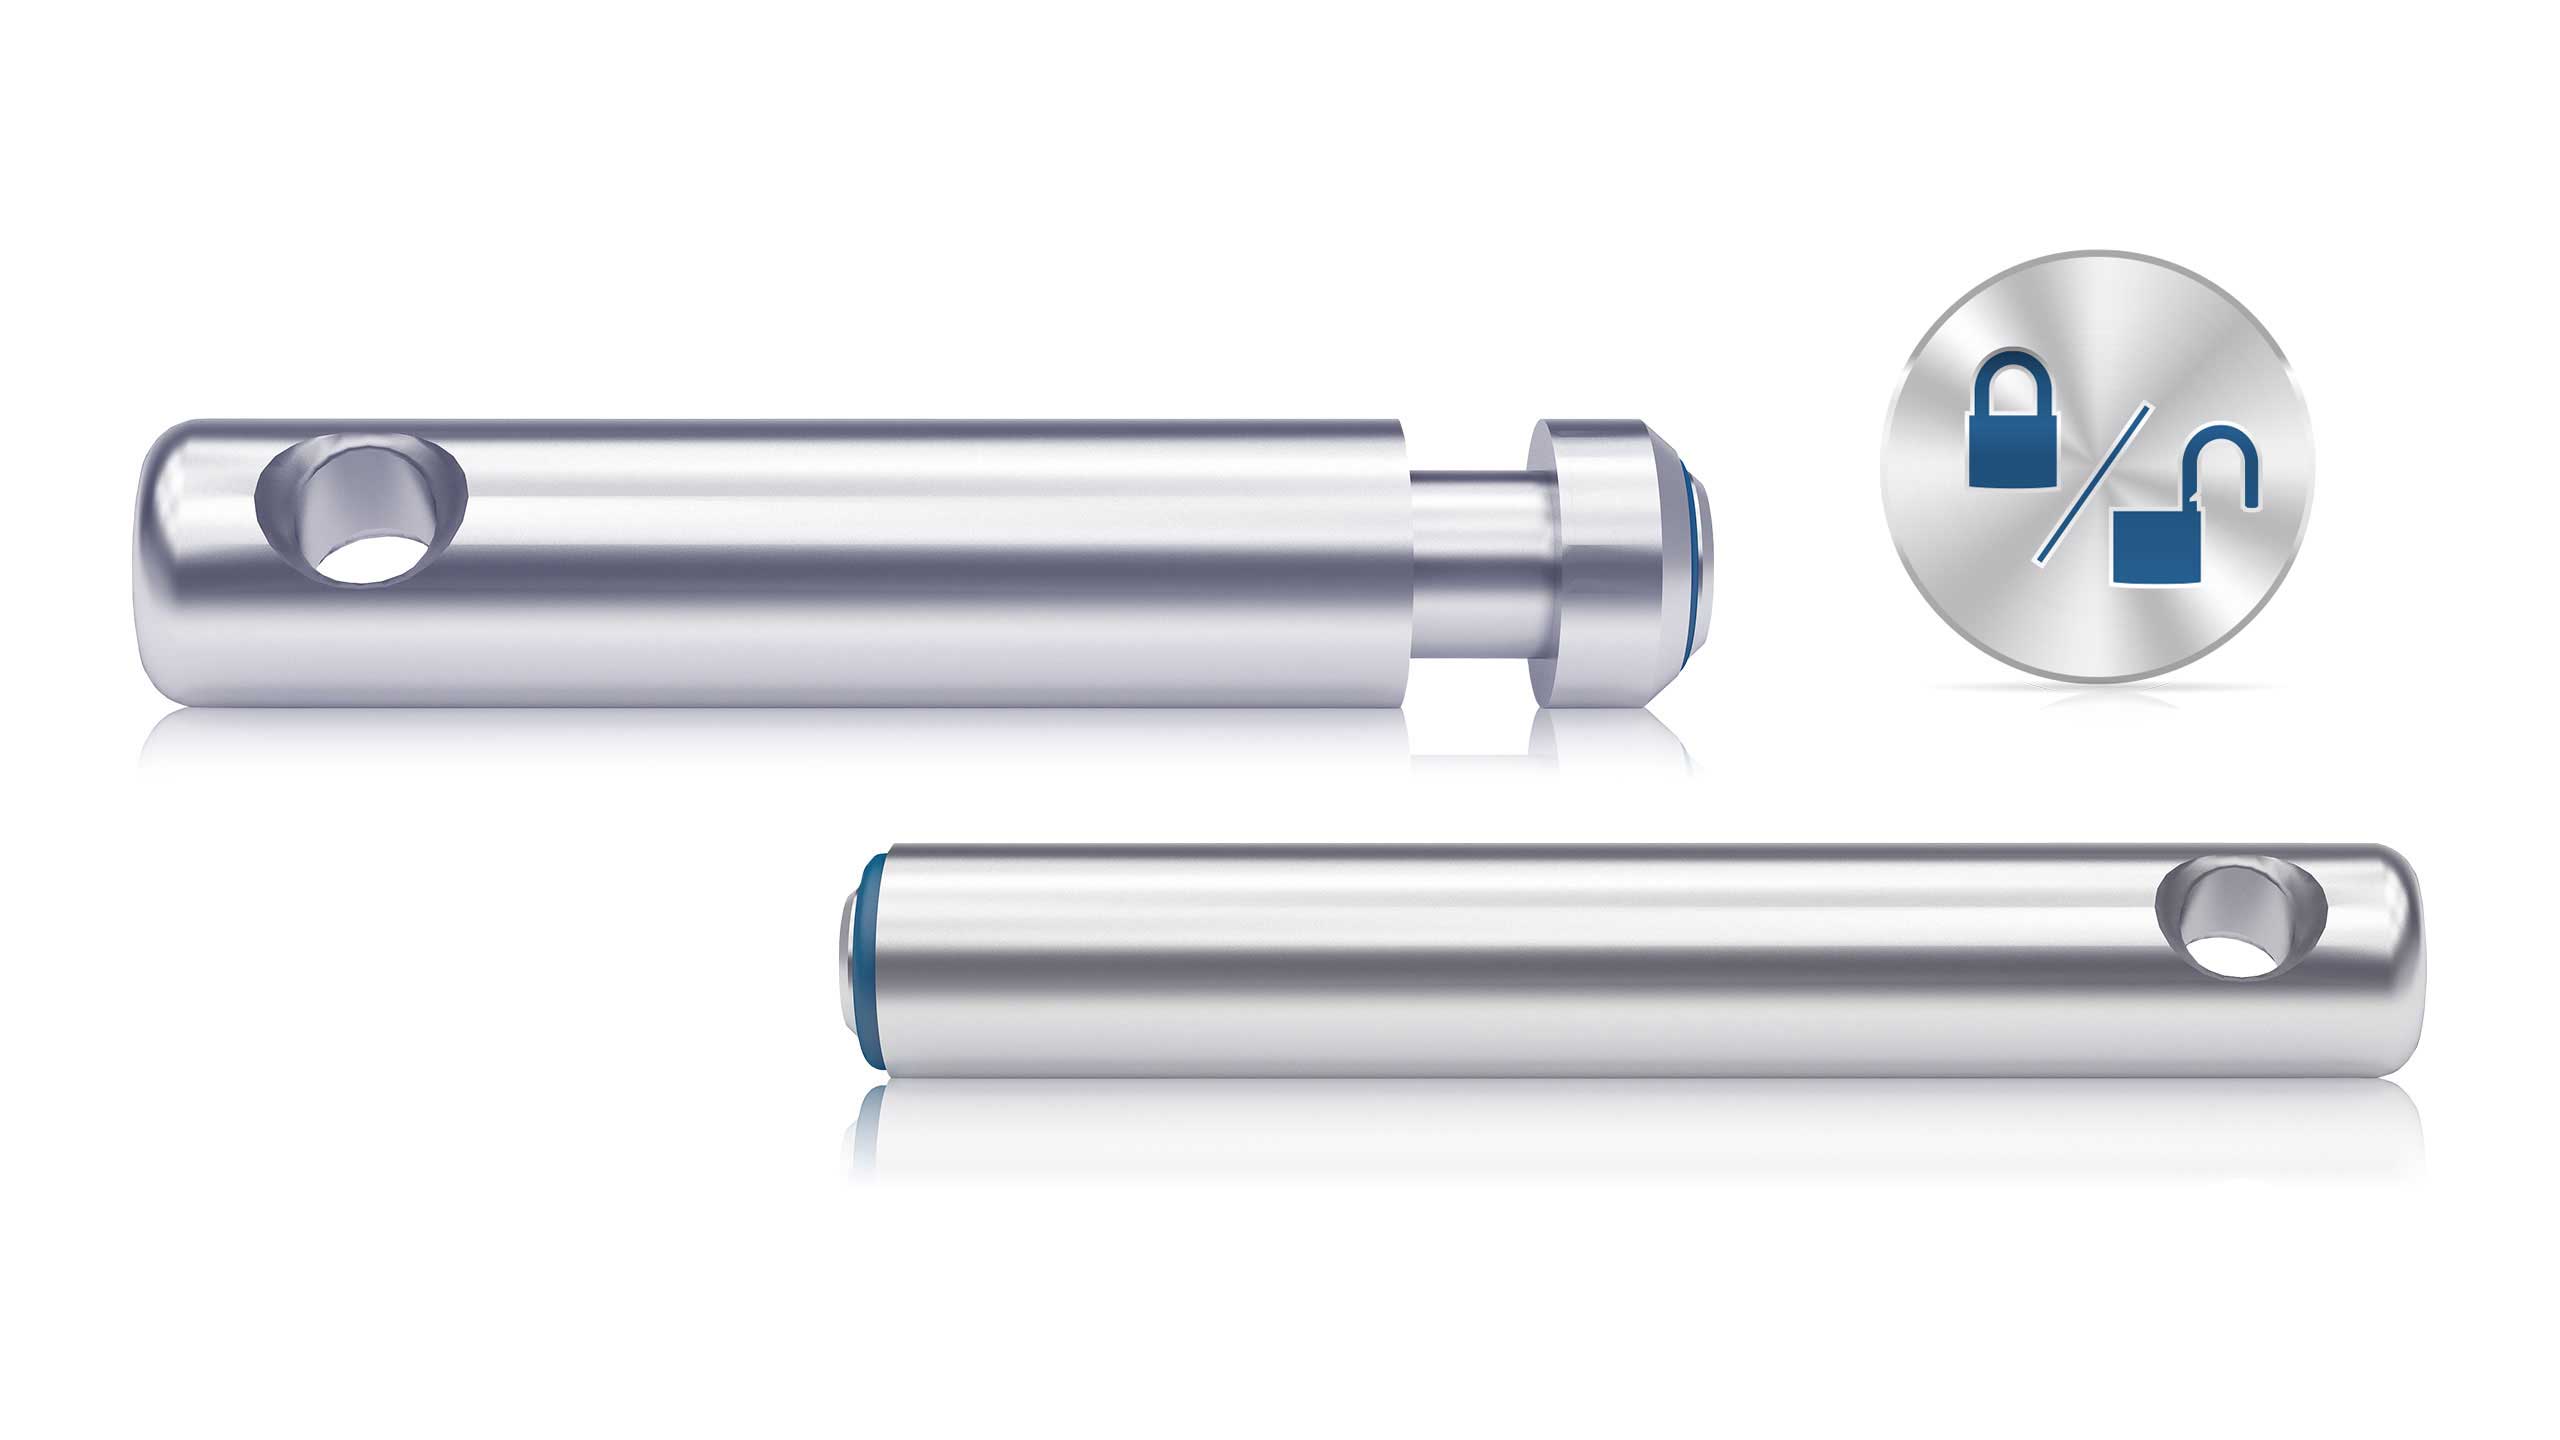 IntelliPin lockable key pegs sound the alarm immediately if the key is removed from the key cabinet.